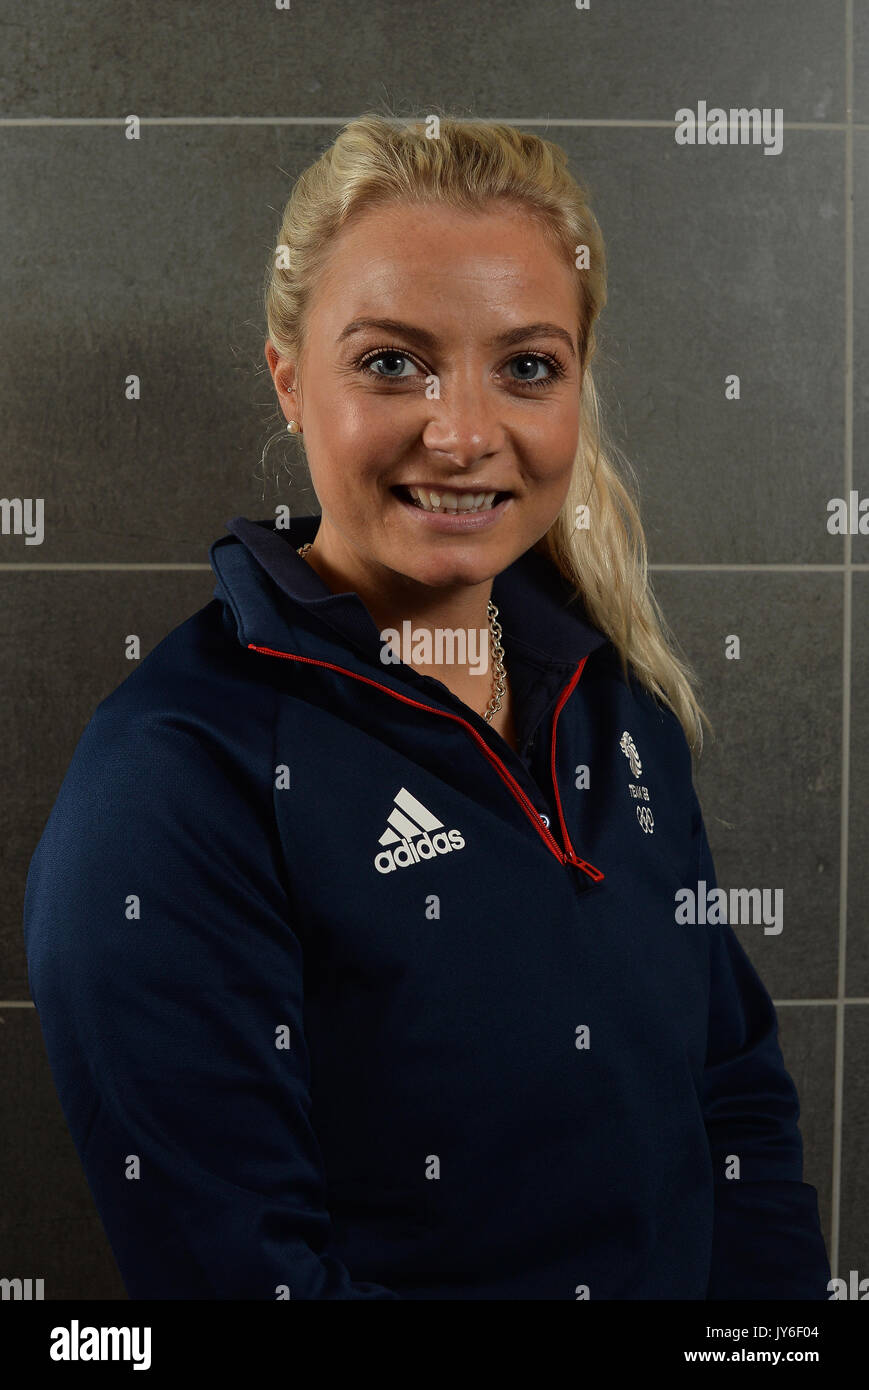 Anna Sloan during the PyeongChang 2018 Olympic Winter Games photocall at Heriot Watt University, Oriam. PRESS ASSOCIATION Photo. Picture date: Friday August 18, 2017. Photo credit should read: Mark Runnacles/PA Wire Stock Photo